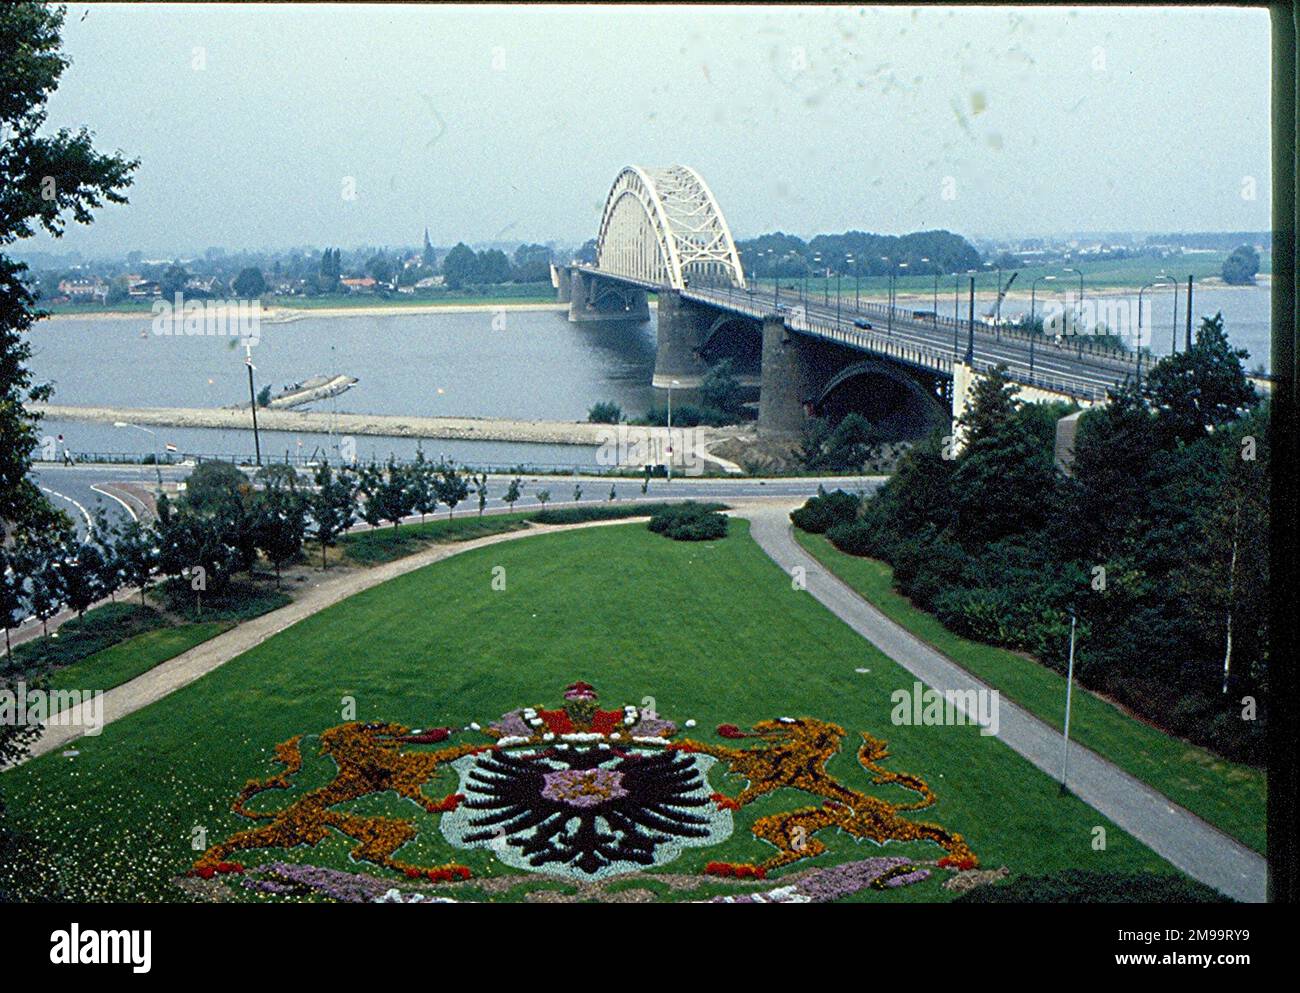 During Operation Market Garden in September 1944, the British and Americans, with Polish support, launched a joint air and land assault northwards from Belgium and then via Holland, in an attempt to outflank German defences along the River Rhine. The bridge here at Nijmegen was the target of the American 82nd Airborne Division, which was tasked to capture it so that the advancing tanks of the British Grenadiers could cross the river and move on towards Arnhem. The Coat of Arms in the foreground is that of Nijmegen, and the grassed area is bordered with Canadian Sugar Maple trees presented by Stock Photo